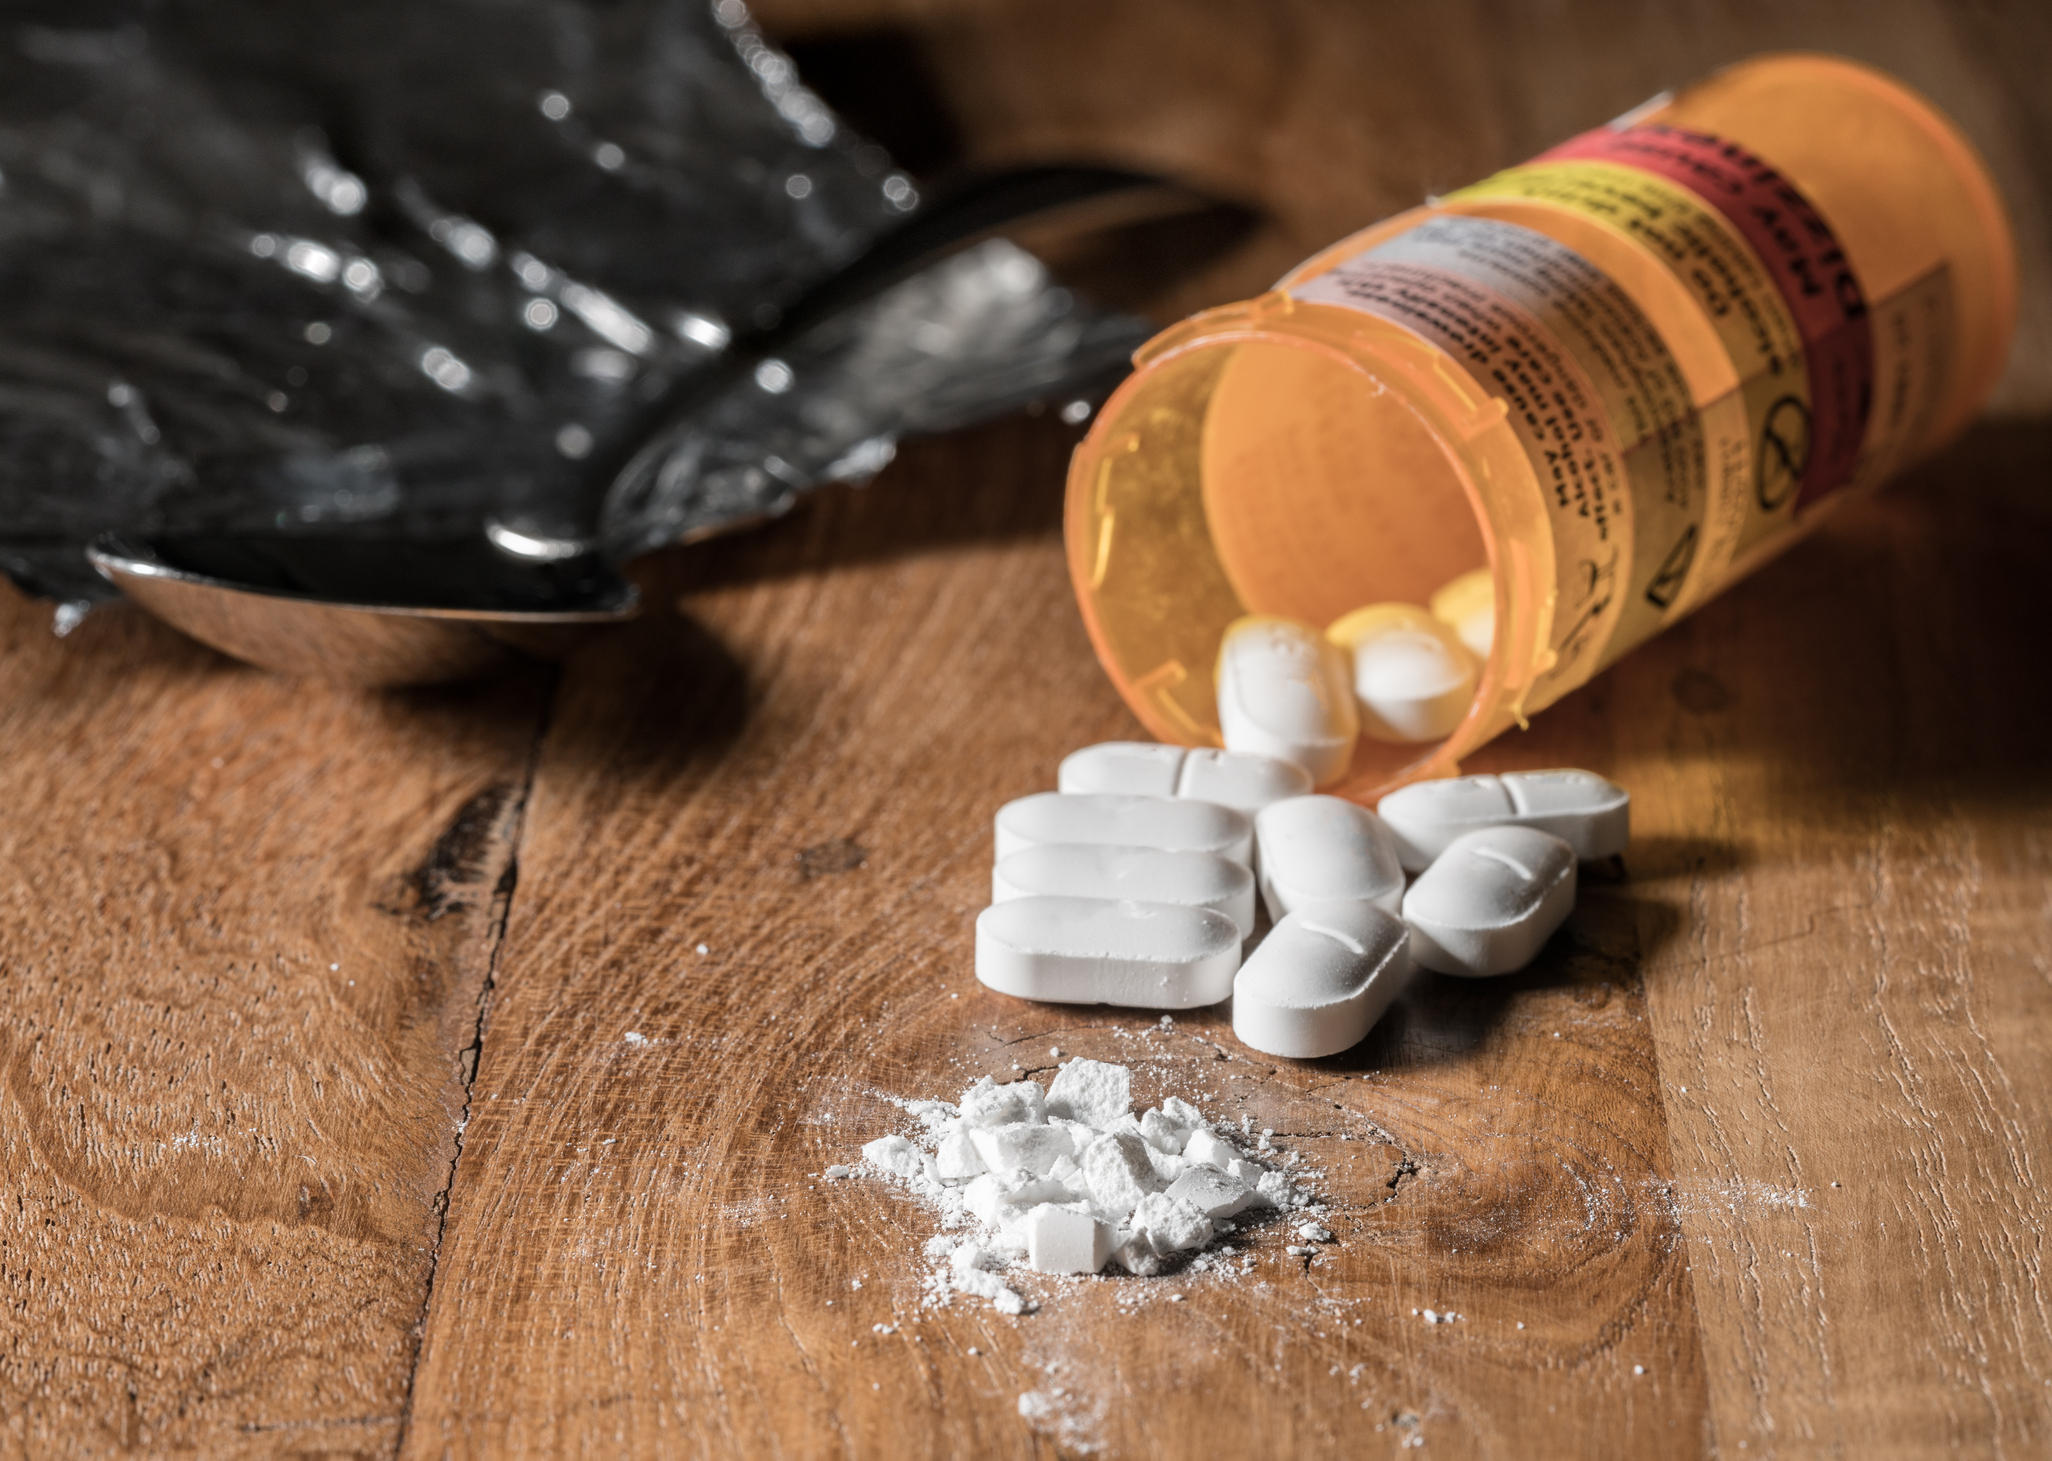 Pills of Oxycodone on a wooden table. (Credit CBS News)